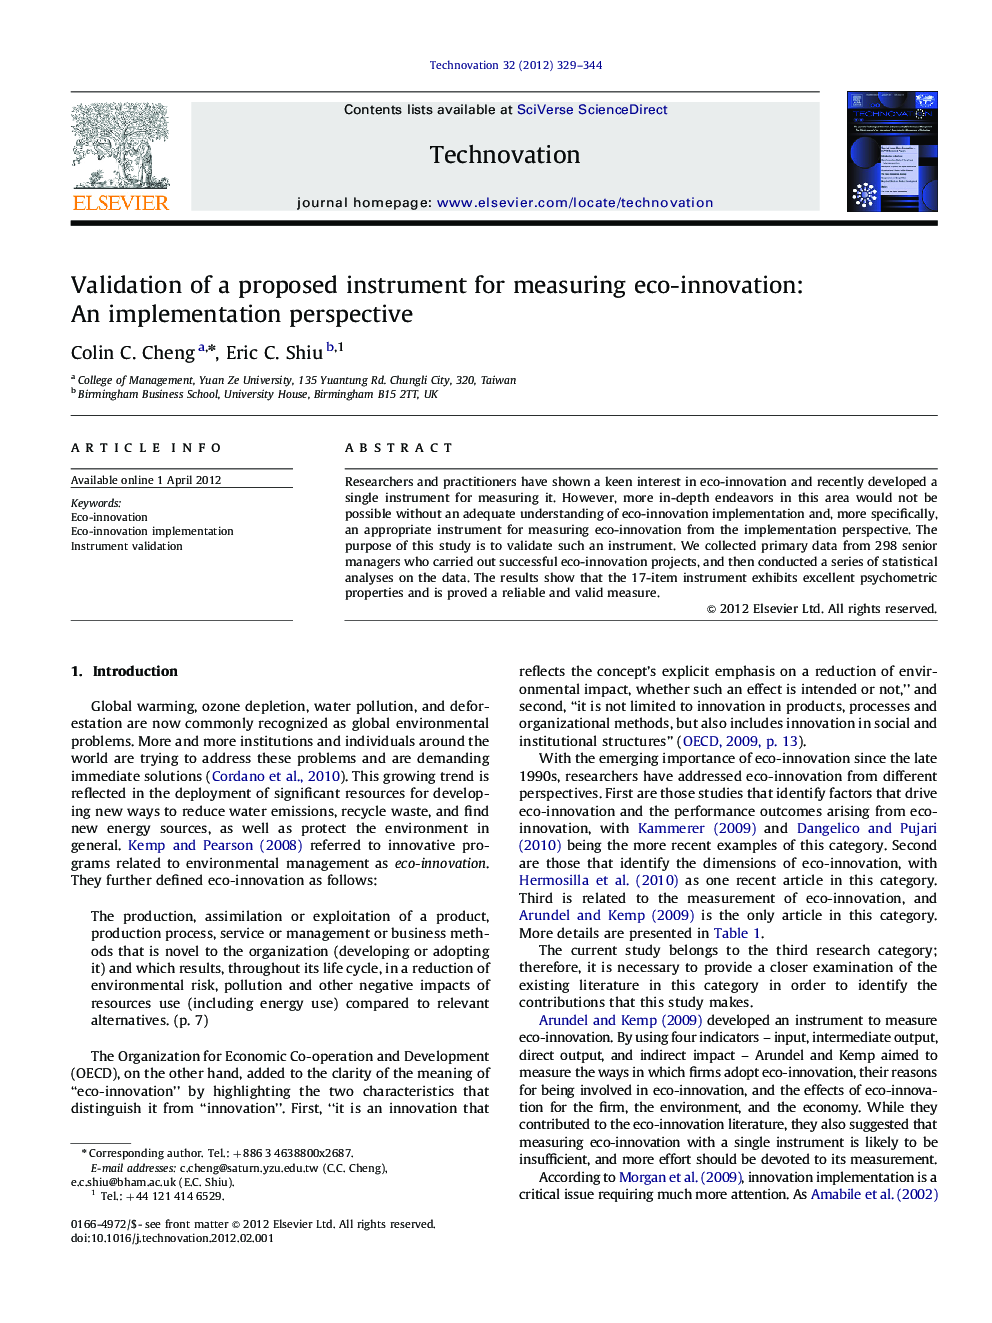 Validation of a proposed instrument for measuring eco-innovation: An implementation perspective